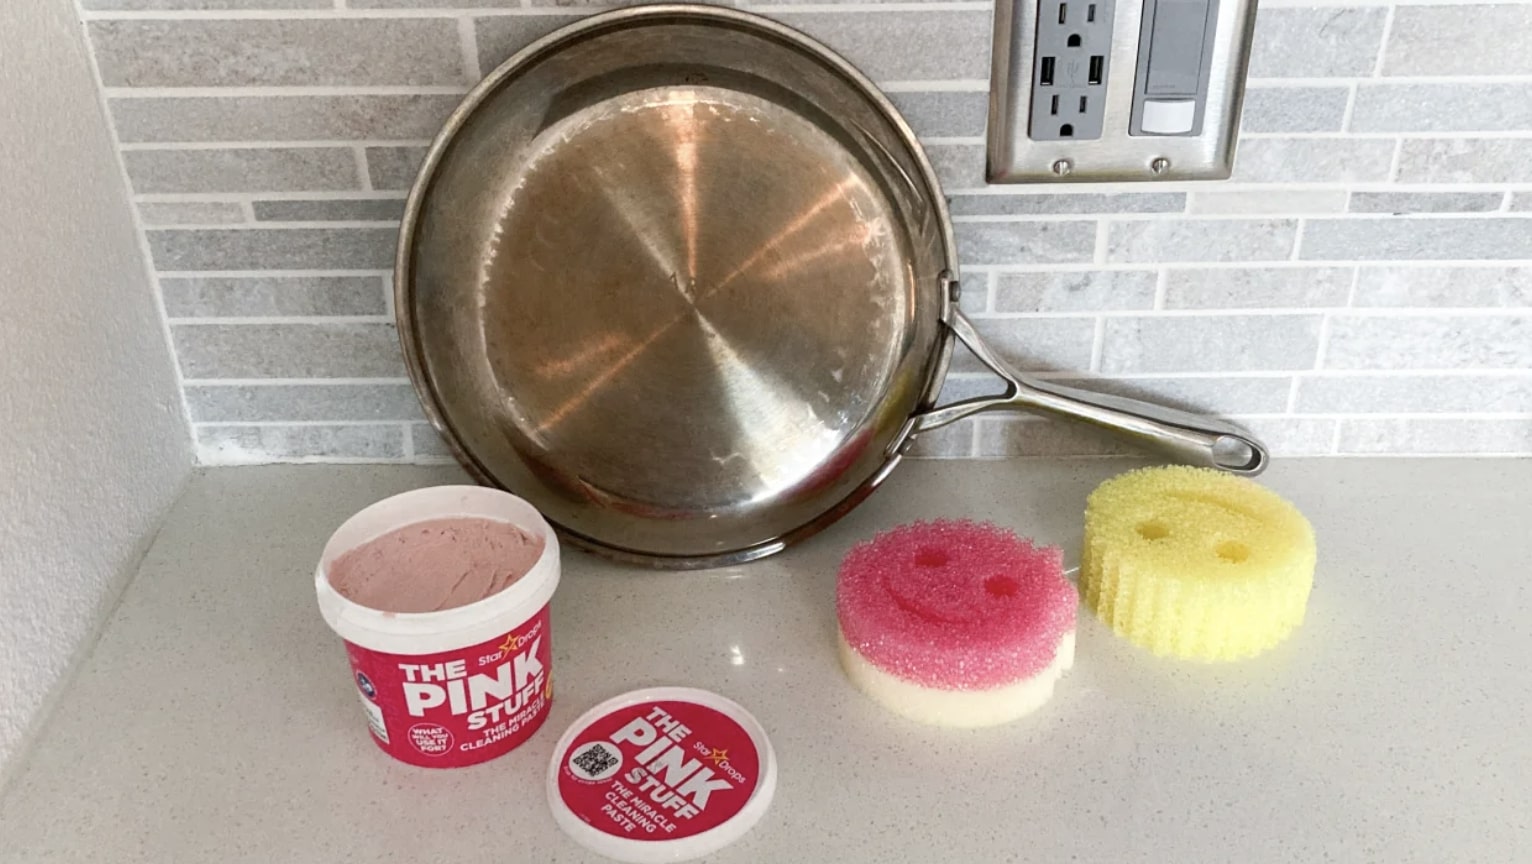 Stainless steel pan, two Scrub Daddy sponges and The Pink Stuff